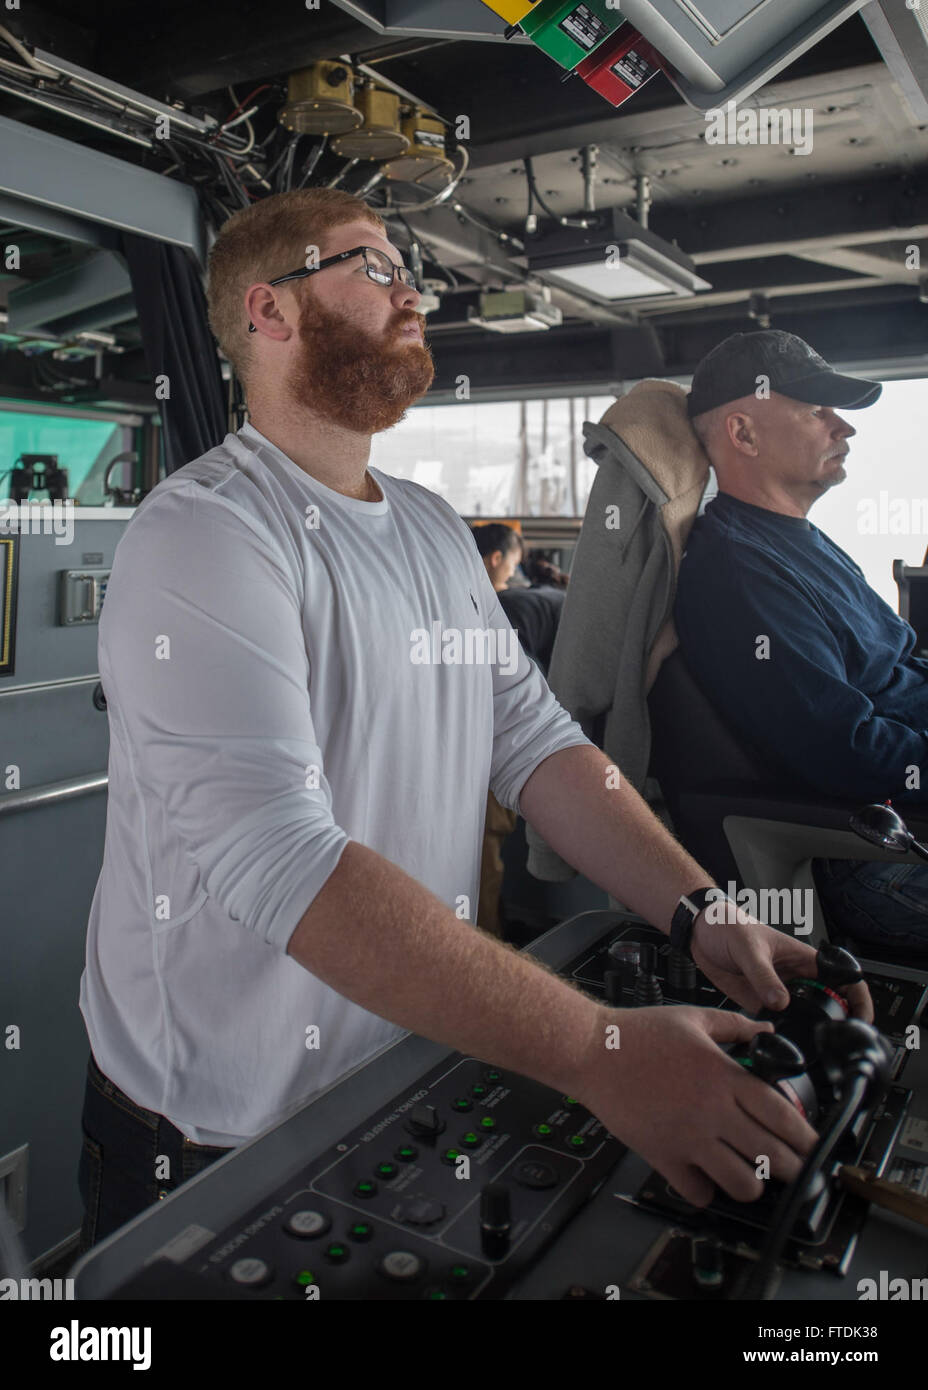 160104-N-WV703-001 ATLANTIC OCEAN (Jan. 4, 2016) 3rd Mate Alexander Spitz, a civil service mariner, maintains the ship’s course aboard USNS Spearhead (T-EPF 1) Jan. 4, 2015. The Military Sealift Command expeditionary fast transport vessel USNS Spearhead is on a scheduled deployment to the U.S. 6th Fleet area of operations to support the international collaborative capacity-building program Africa Partnership Station. (U.S. Navy photo by Mass Communication Specialist 3rd Class Amy M. Ressler/Released) Stock Photo